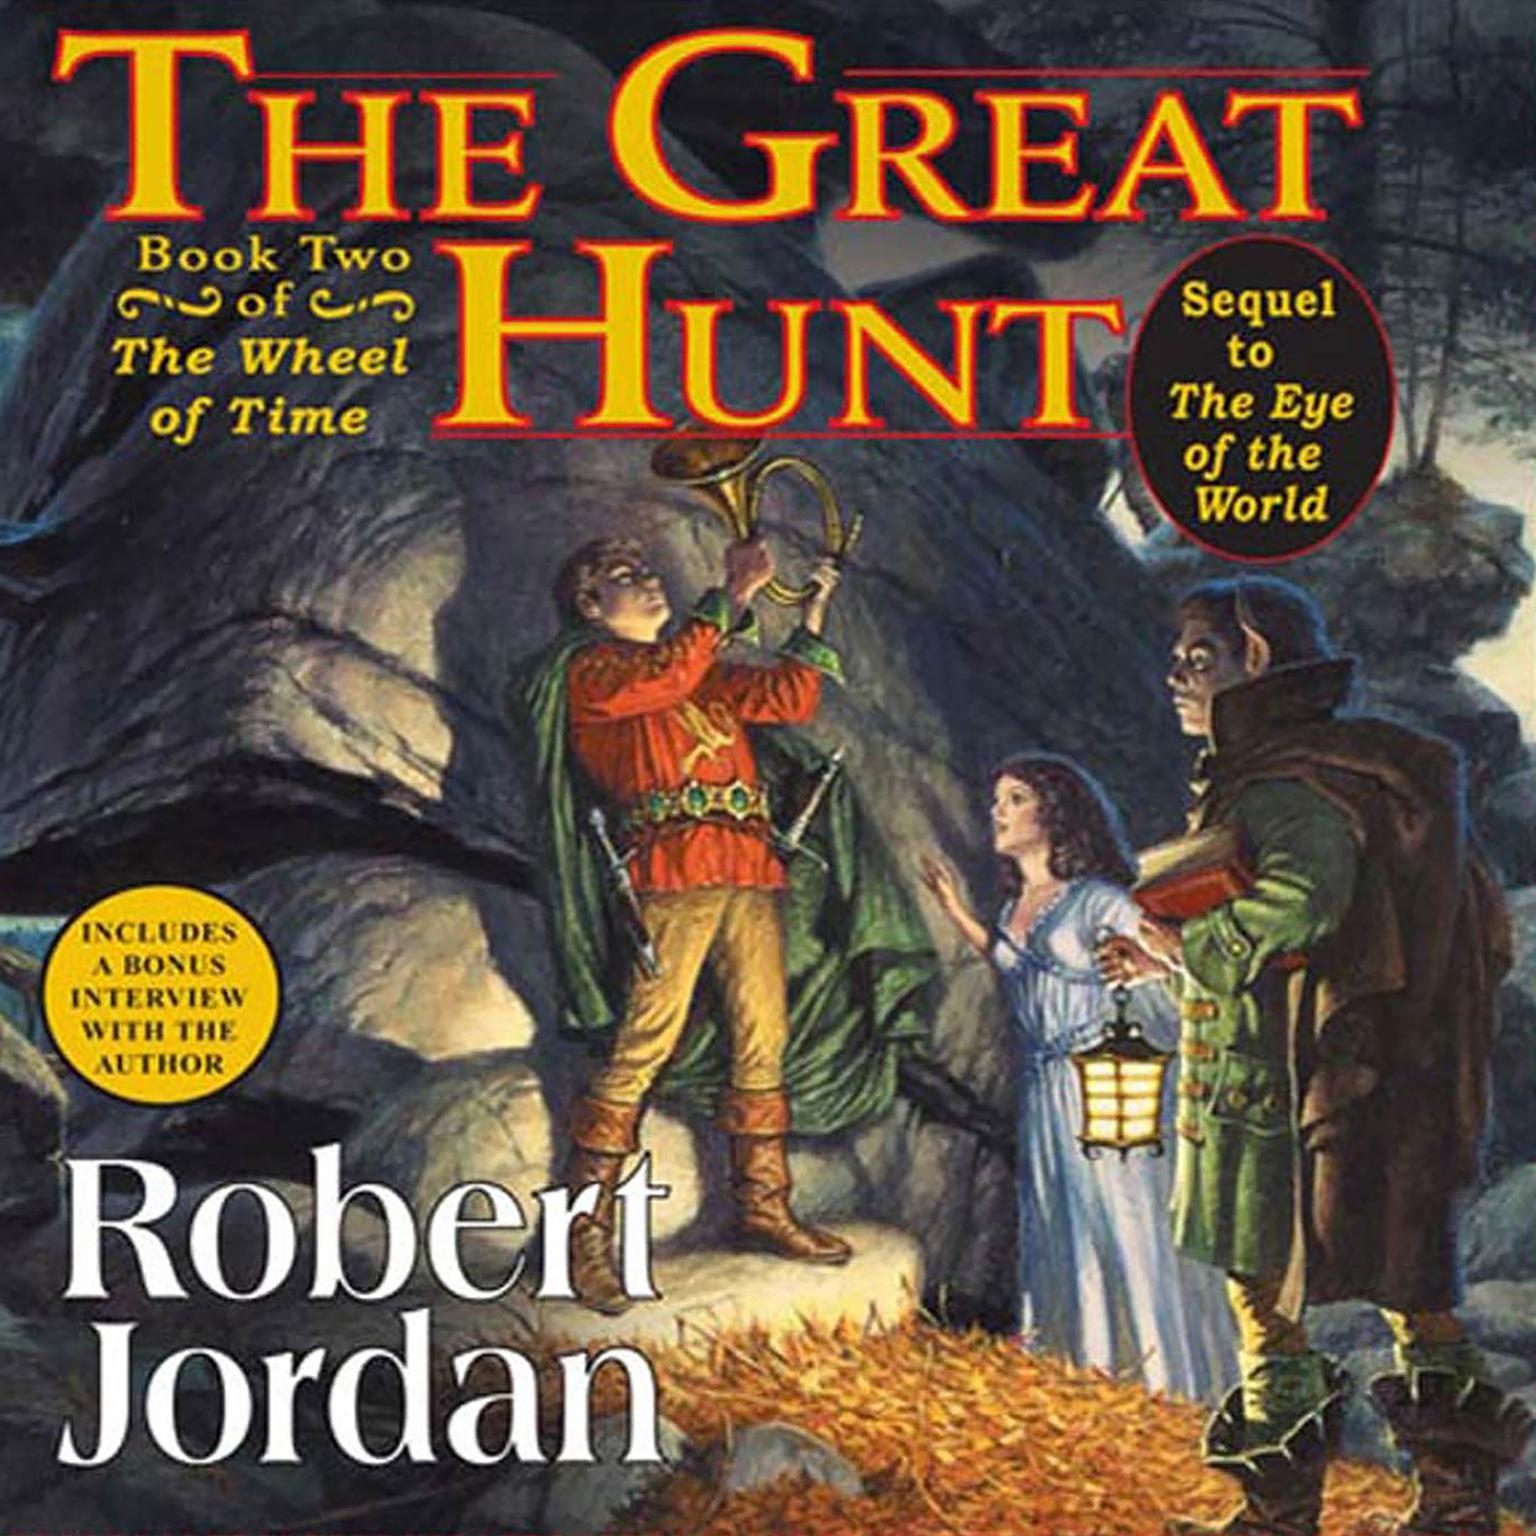 The great hunt audiobook free download 9th political theory ncert pdf book download